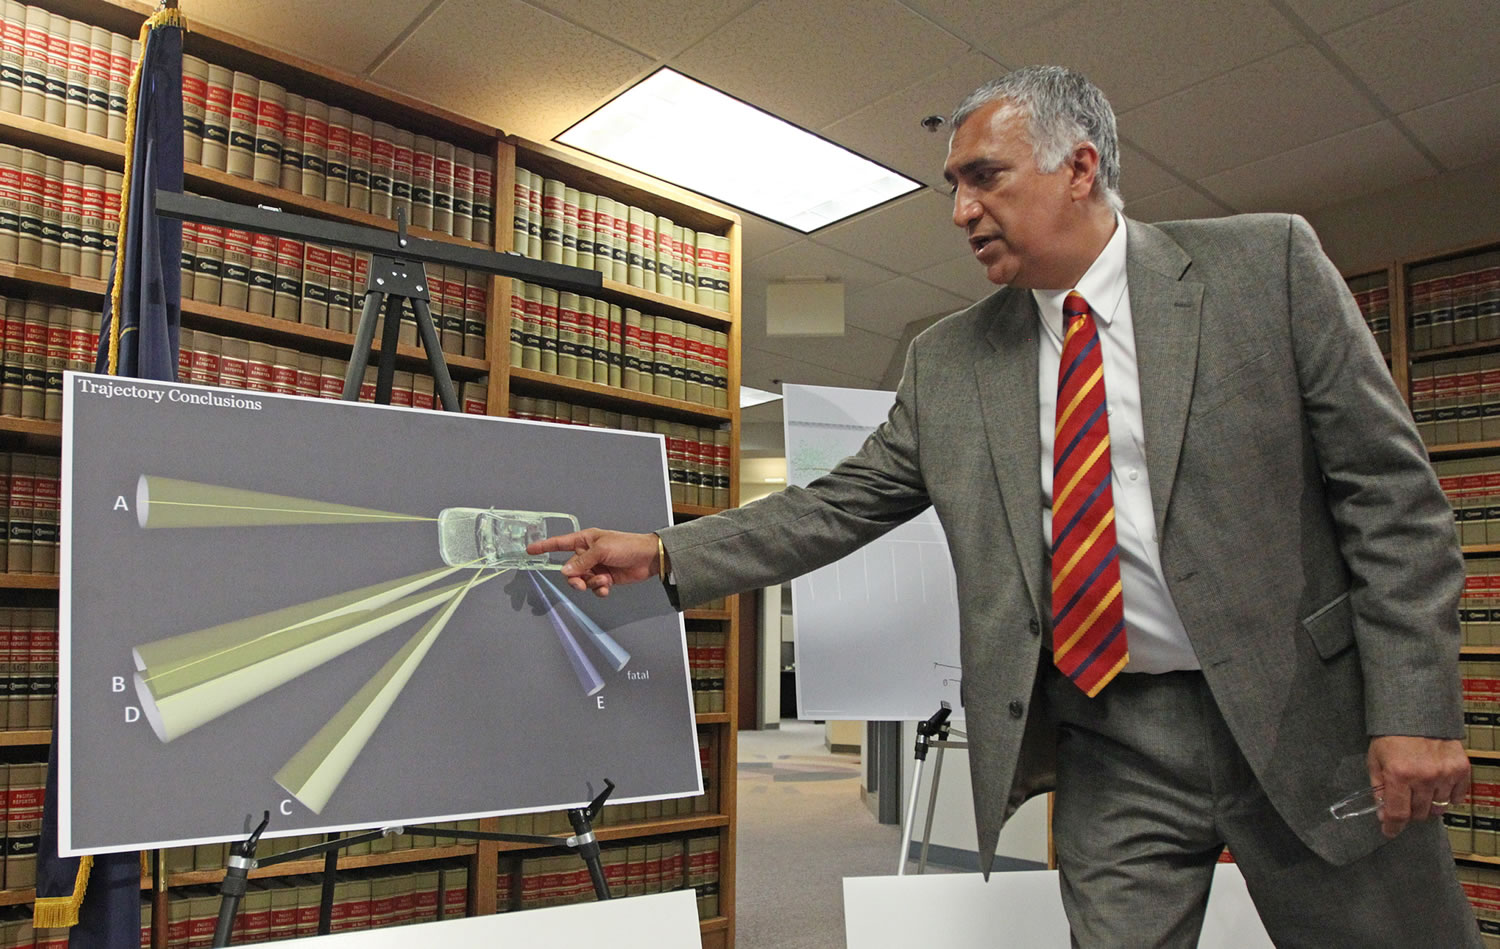 Salt Lake County District Attorney Sim Gill points out the angle trajectory of the fatal bullet, while discussing the findings of the investigation into the shooting of Danielle Willard during a news conference Aug. 8, in Salt Lake City. Gill announced that a single count of manslaughter had been filed against 33-year-old Shaun Cowley, a former narcotics officer in West Valley City on Thursday. Cowley and another officer fired at Danielle Willard as she backed her car out of a parking spot.